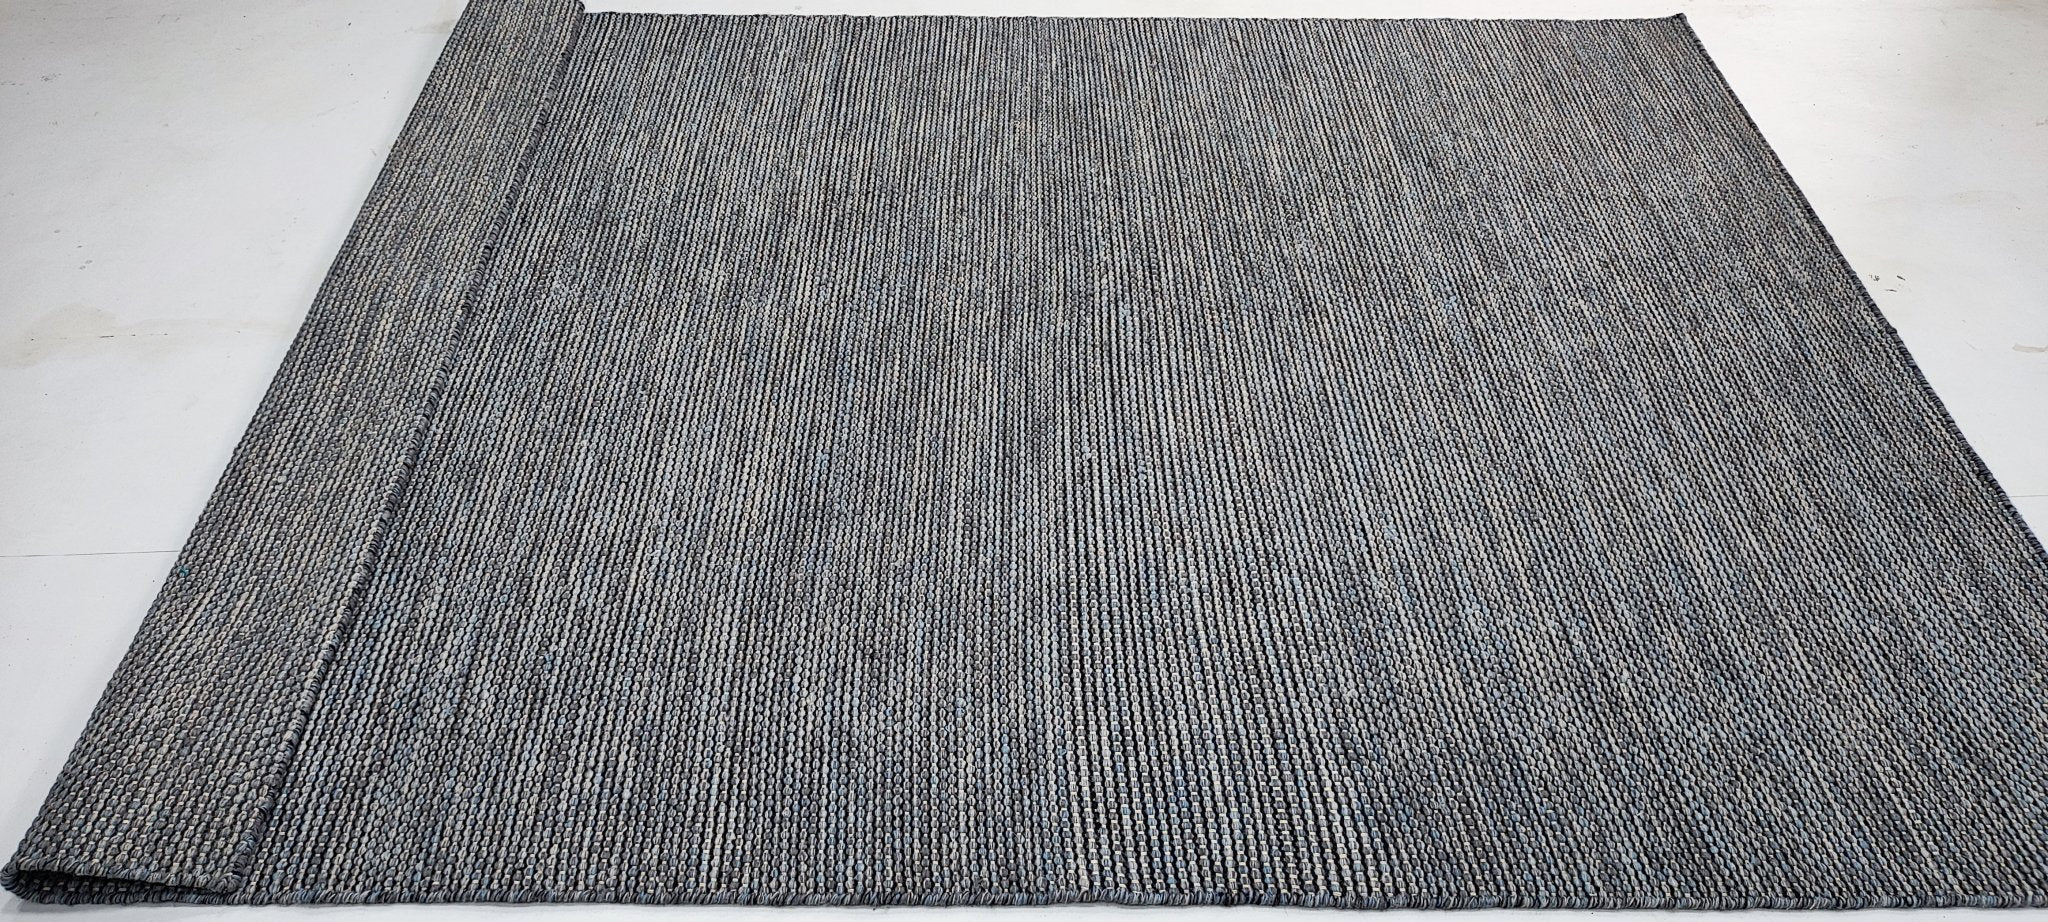 Krewe of Atlas 5.6x7.6 Handwoven Grey Textured Durrie | Banana Manor Rug Factory Outlet